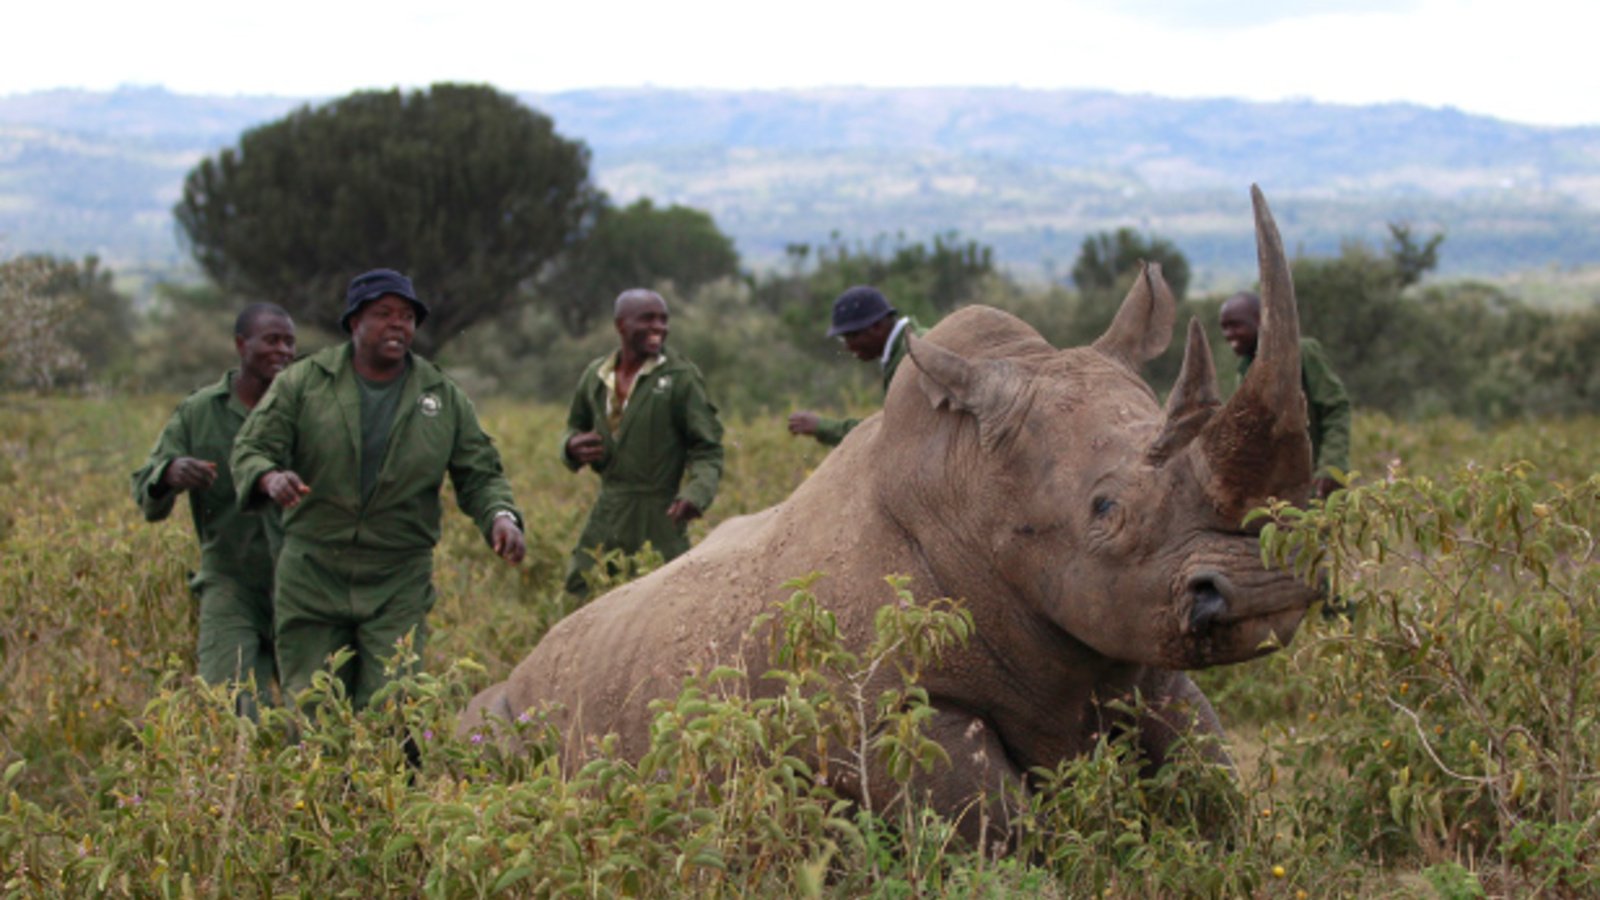 This Tech Entrepreneur Is Trying to Disrupt the Illegal Rhino-Horn Trade